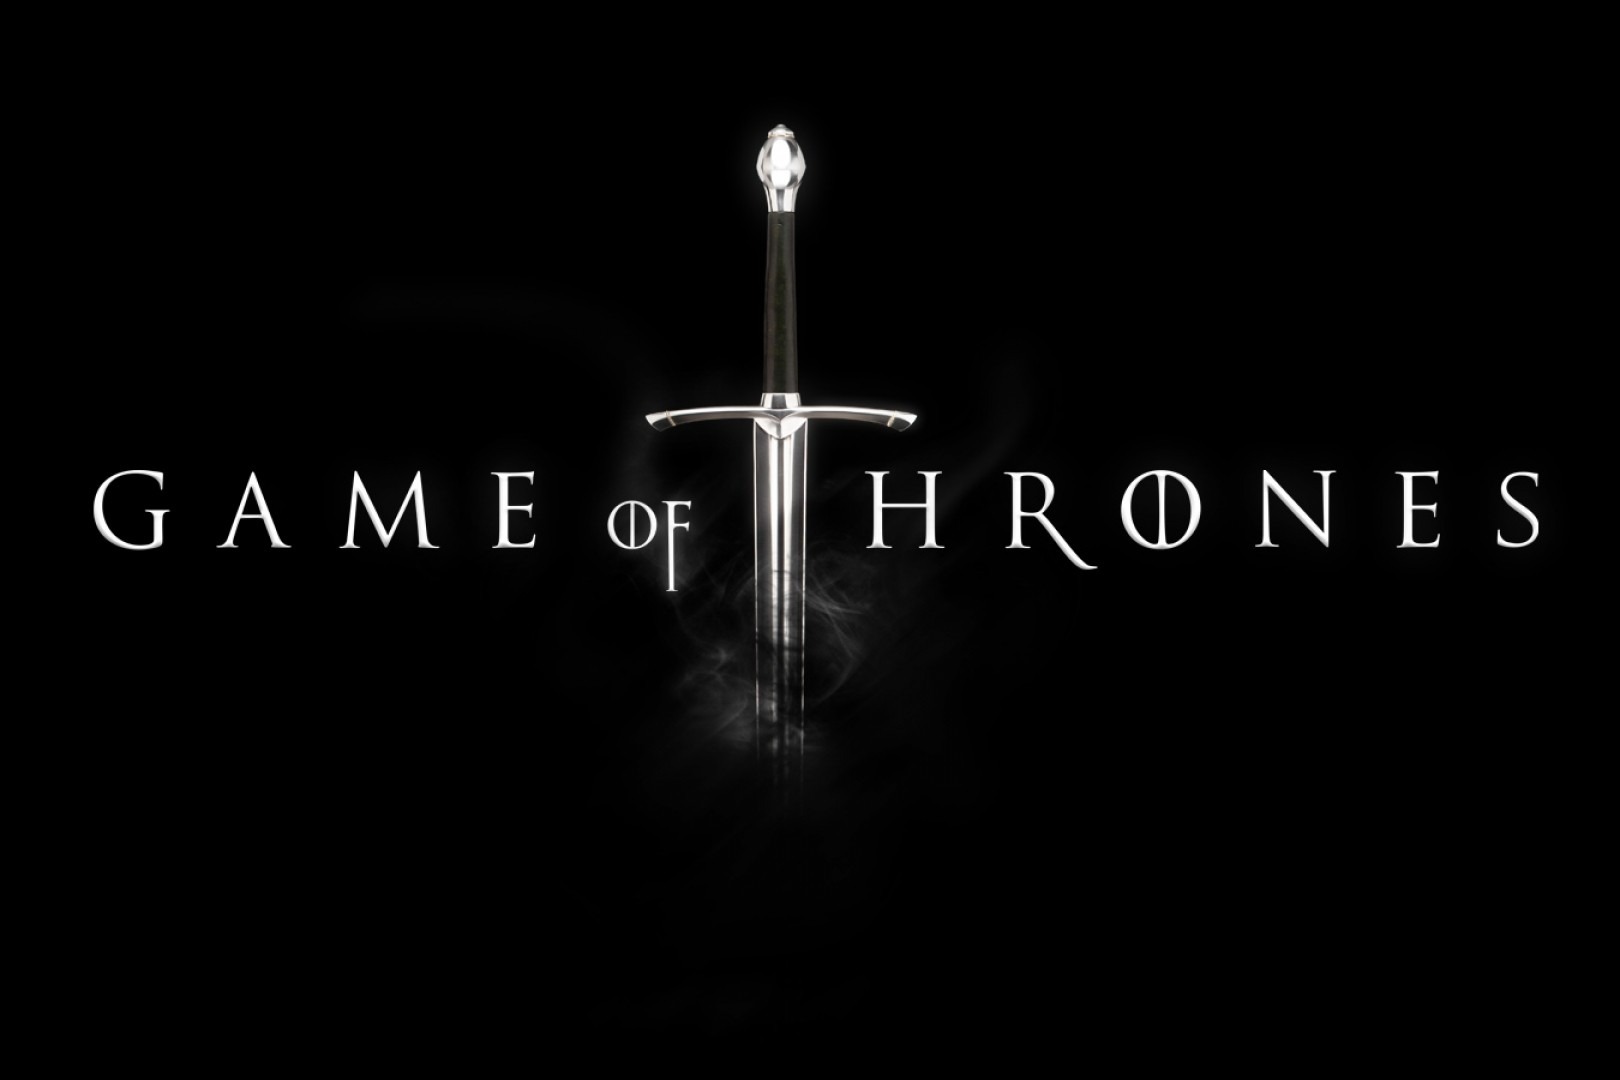 Game of thrones - Bande-Annonce ! 2